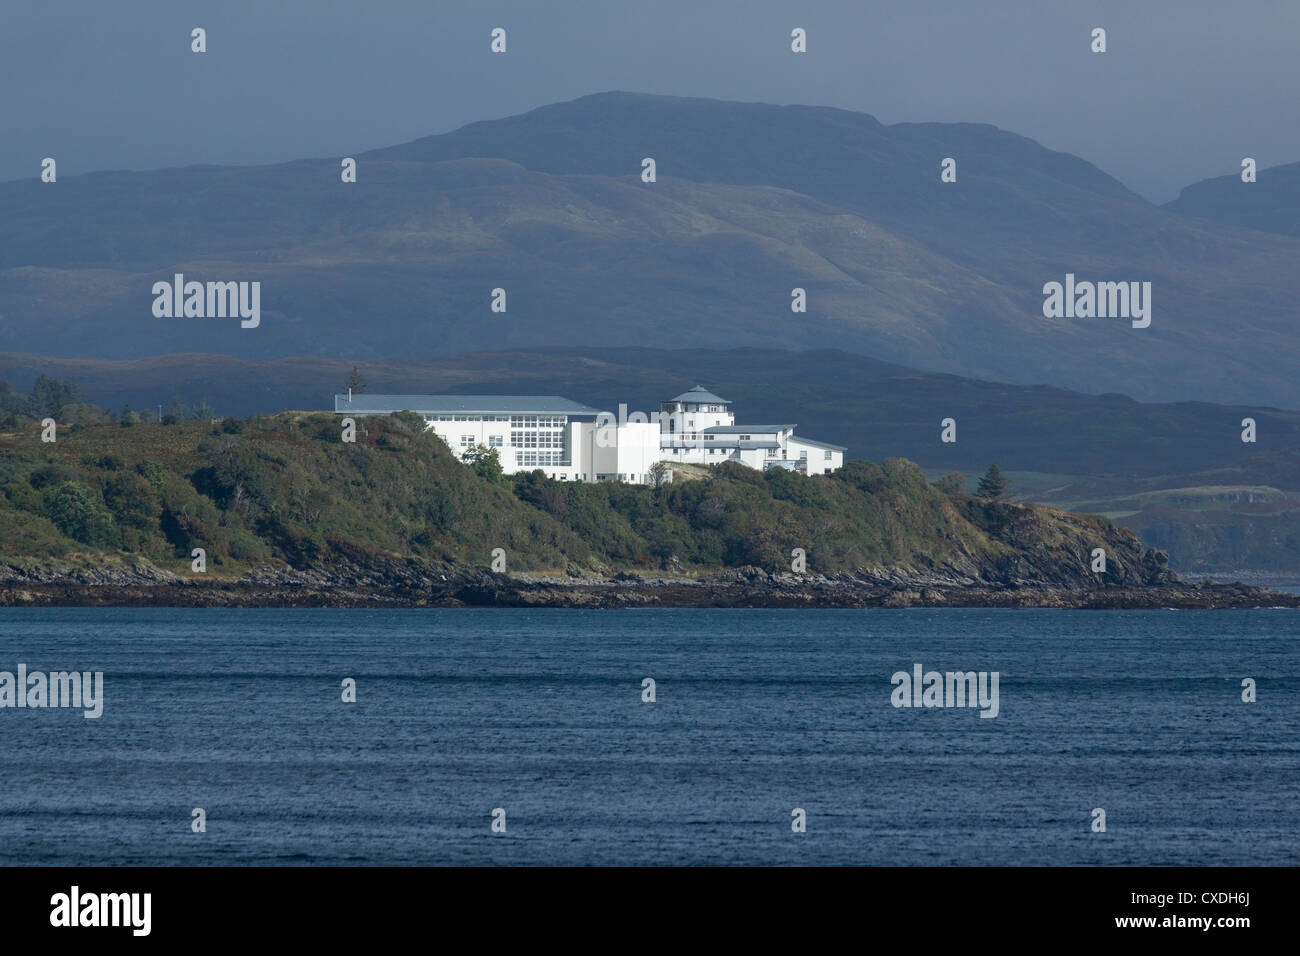 Sabhal Mor Ostaig, National Centre for Gaelic Language and Culture, Sleat, Isle of Skye, Ecosse, UK Banque D'Images